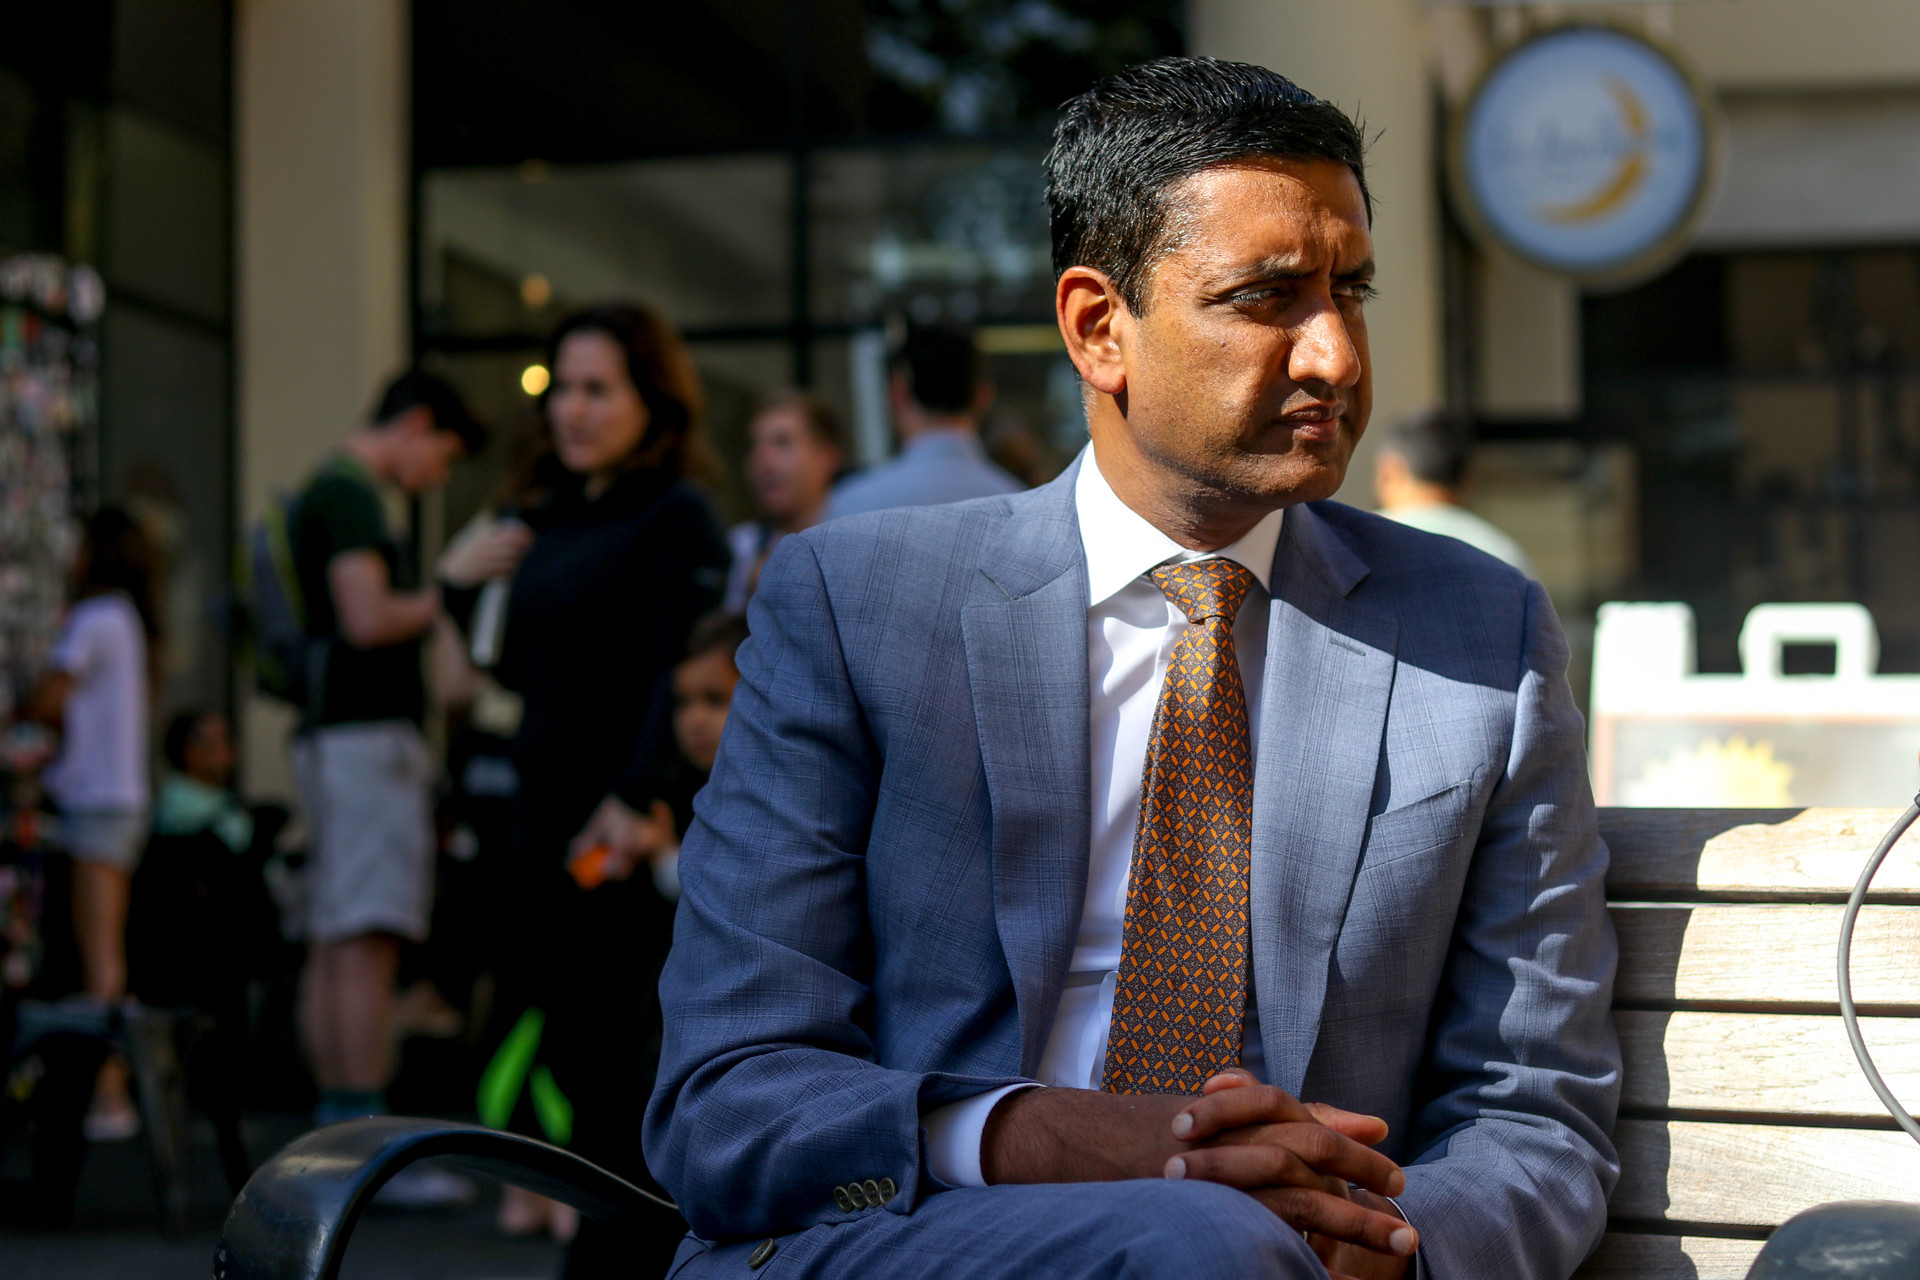 An Indian man with dark hair and eyes wears a light blue business suit and busy orange and green tie sits on a wooden bench outside. He sits crossed-legged with his arms folded on his knee. He looks to the right of the camera. Crowds of people and children are pictured behind him.